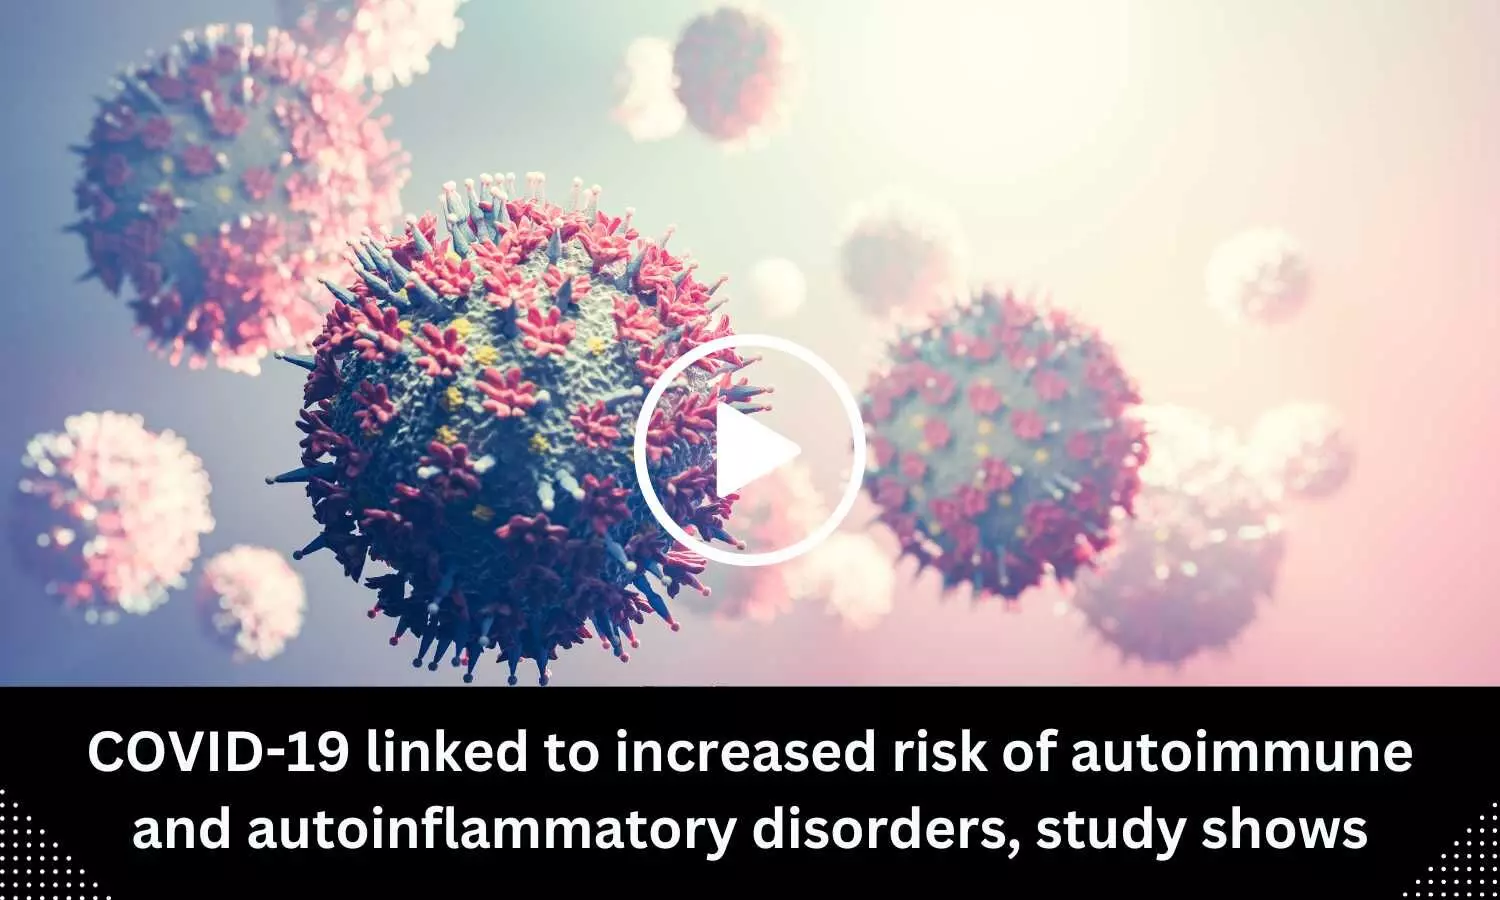 COVID-19 linked to increased risk of autoimmune and autoinflammatory disorders, study shows